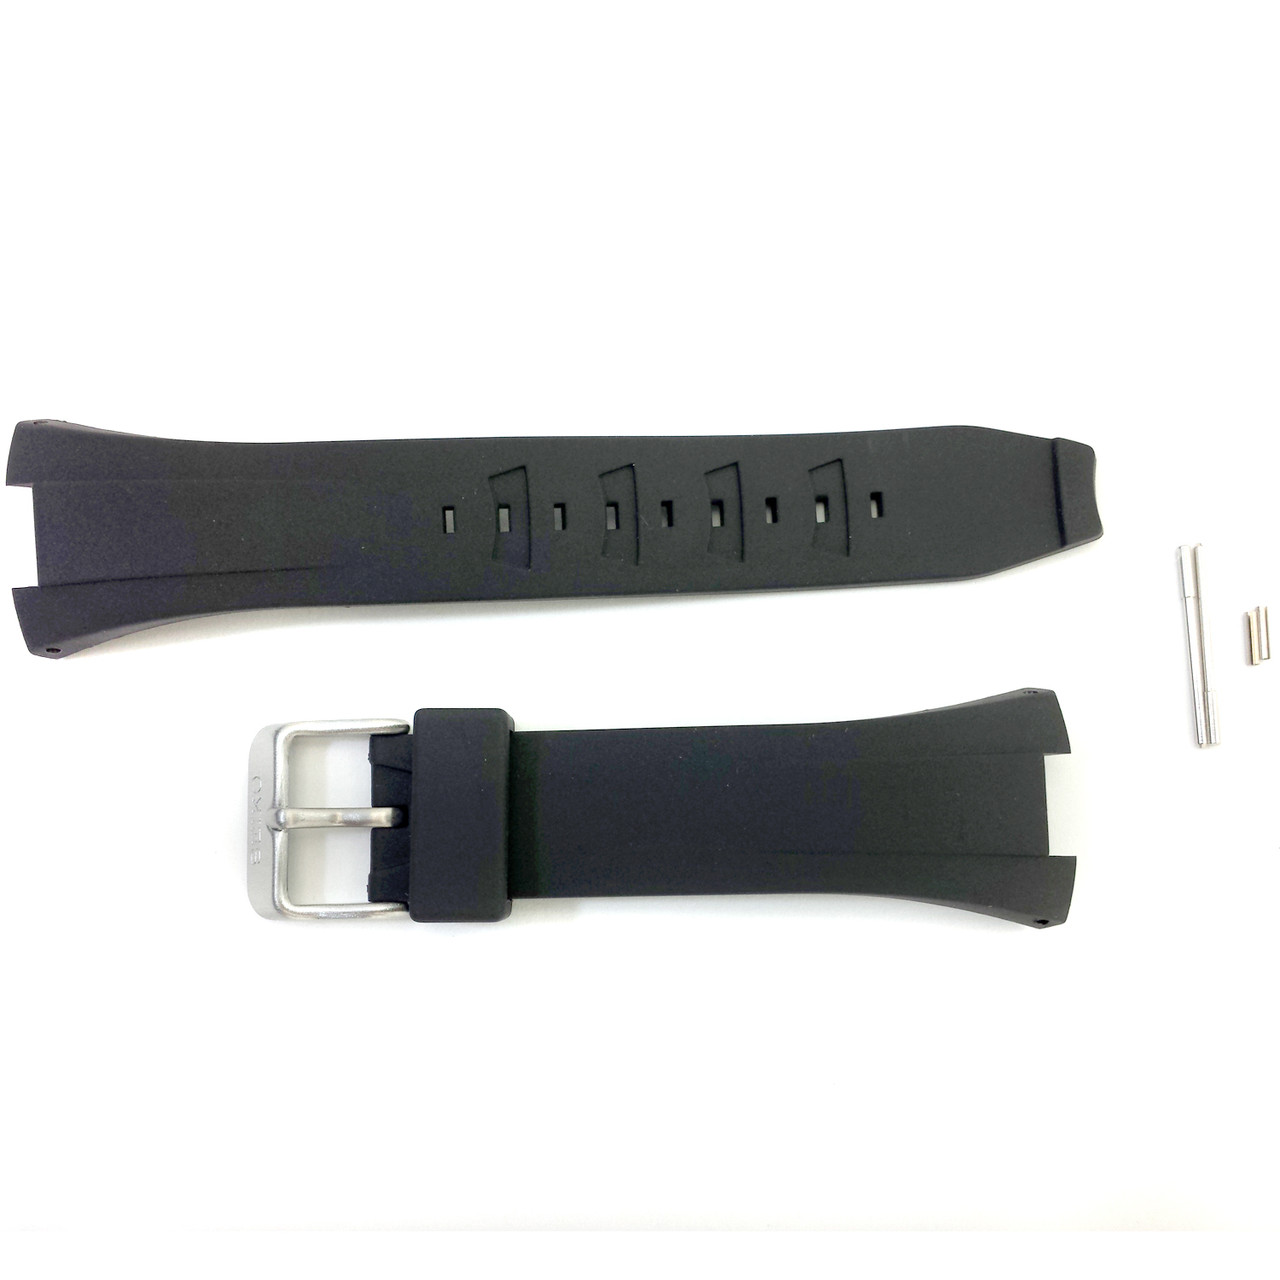 Seiko SNA459 Rubber Band Seiko Watch Bands WatchMaterial